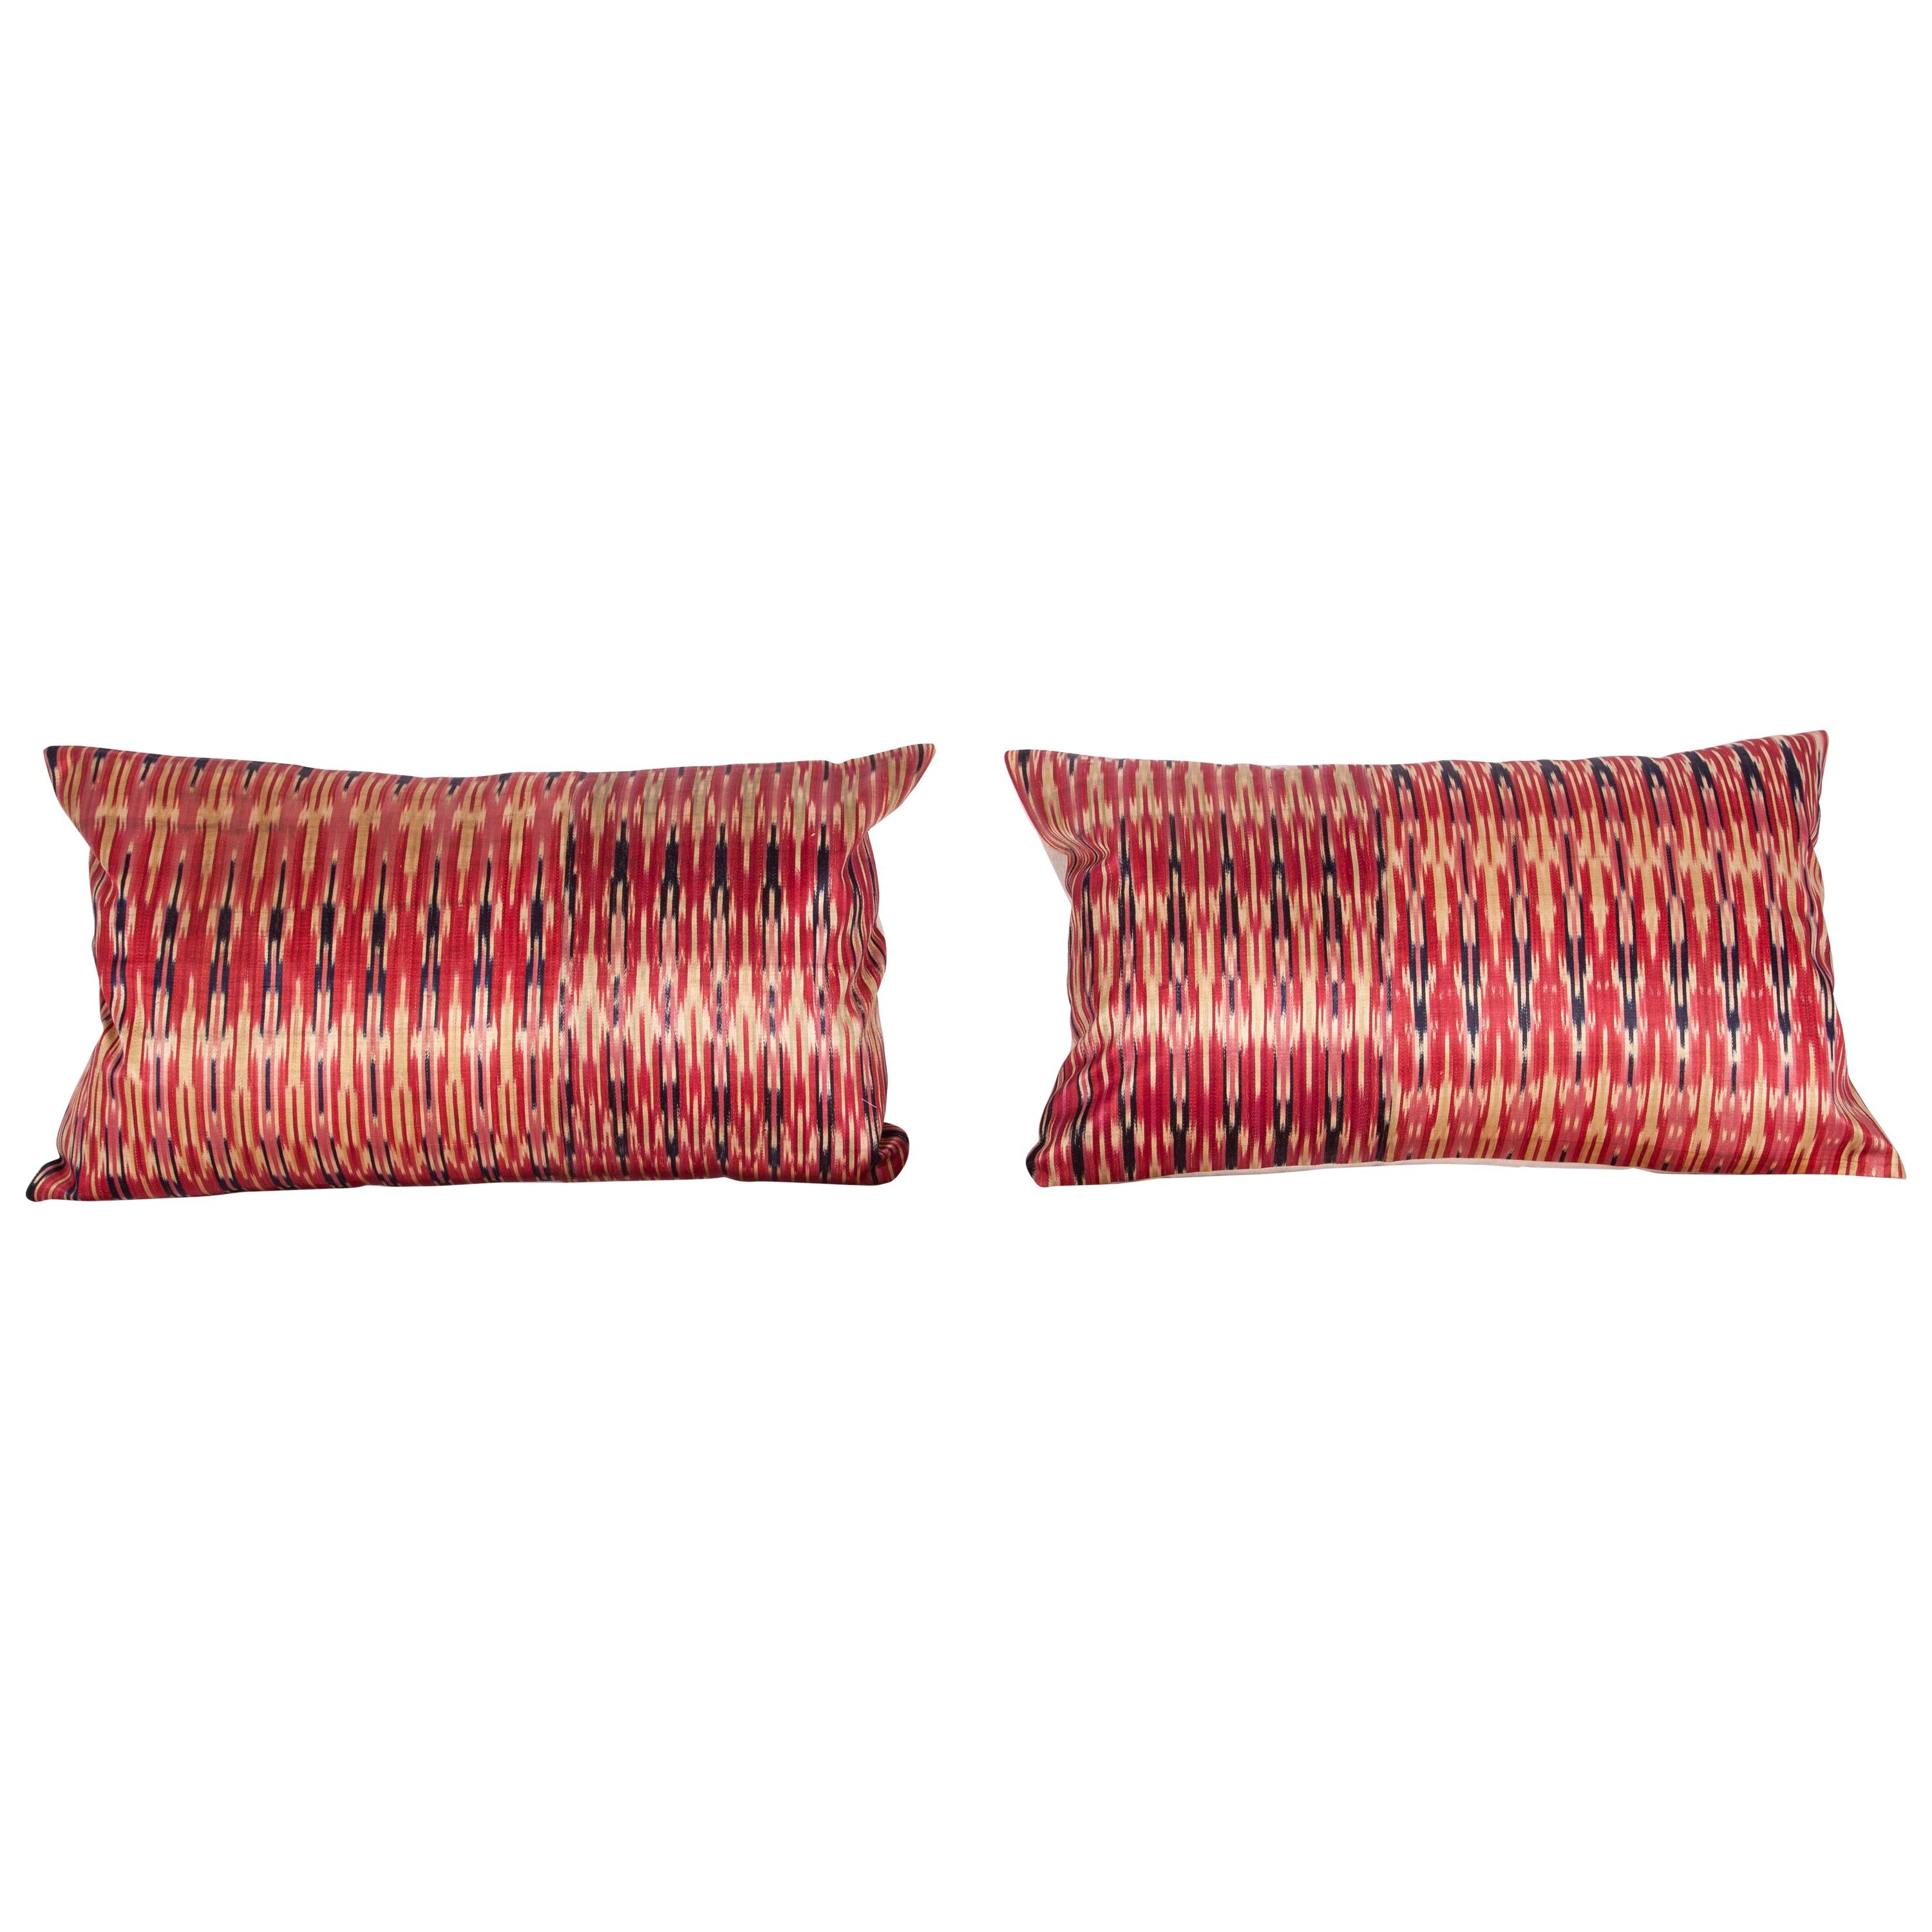 Antique Ikat Pillow Cases Fashioned from a 19th Century Syrian Ikat